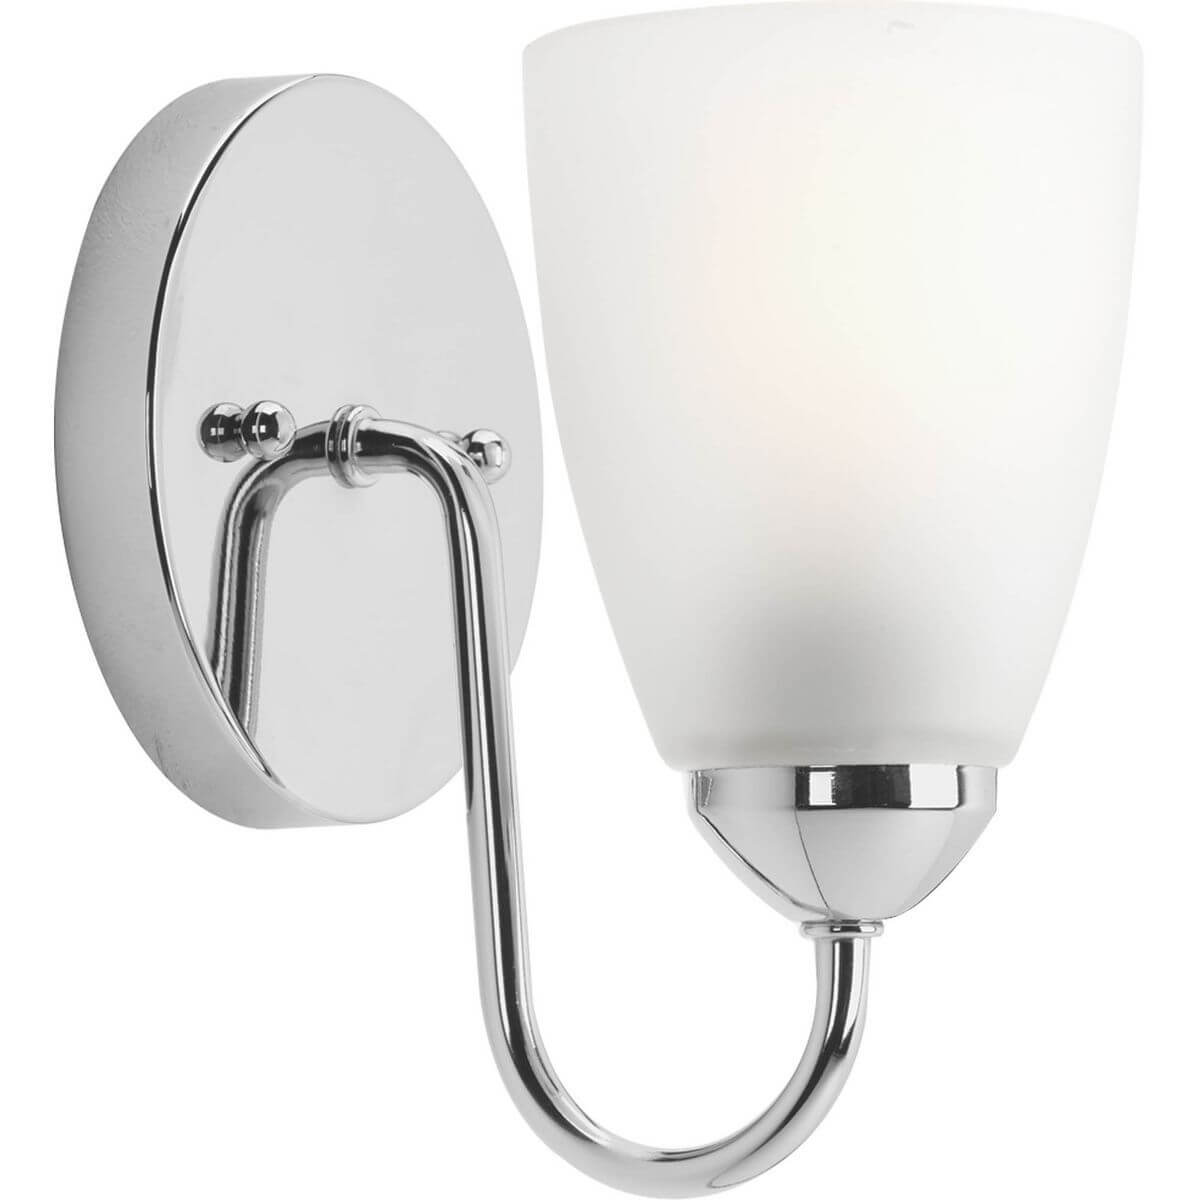 Progress Lighting Gather 1 Light 7 inch Bath Vanity Light in Polished Chrome with Etched Glass P2706-15